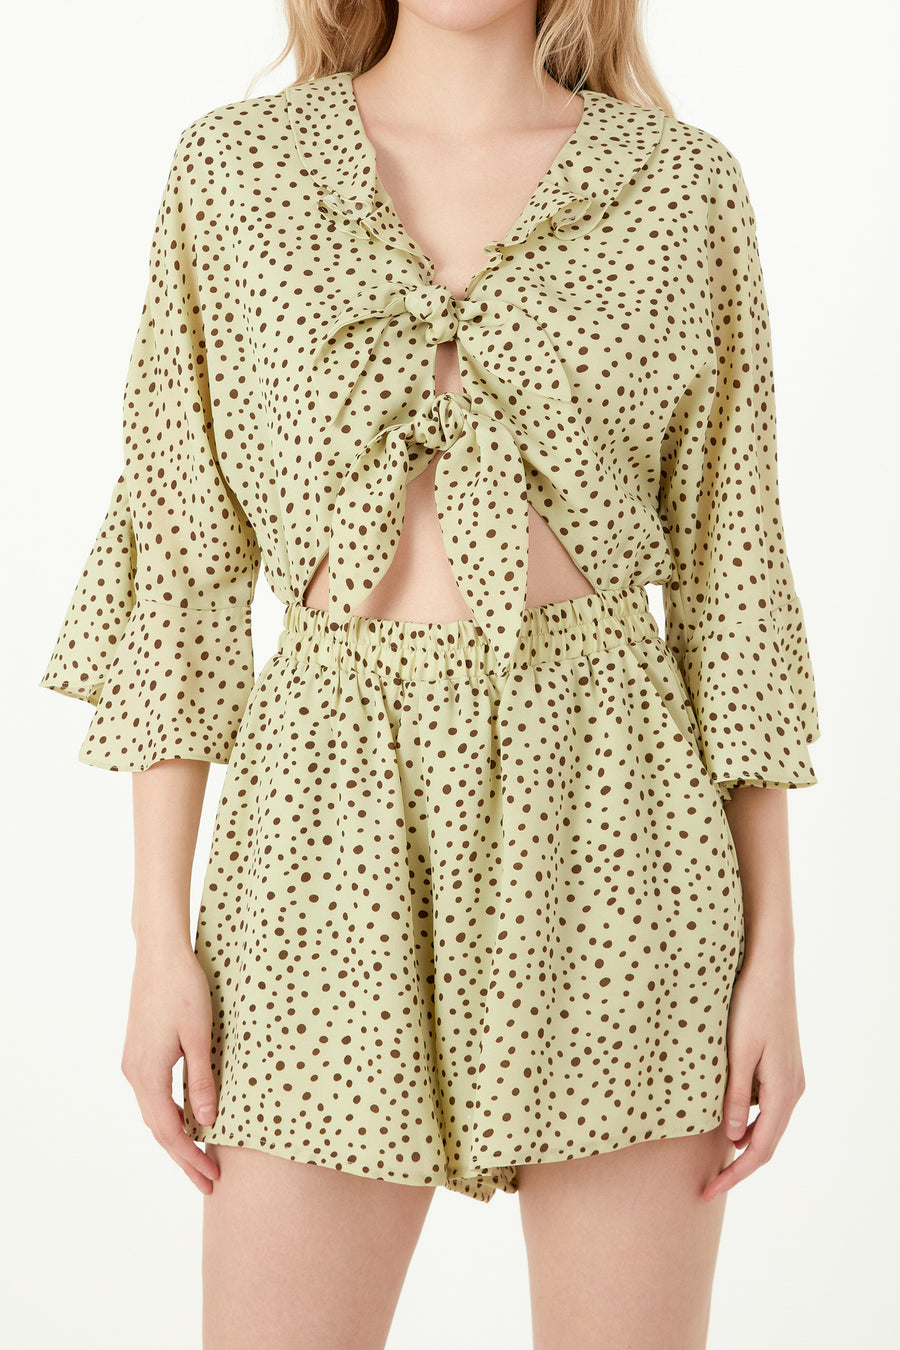 Polka Dot Tied Romper with Ruffles